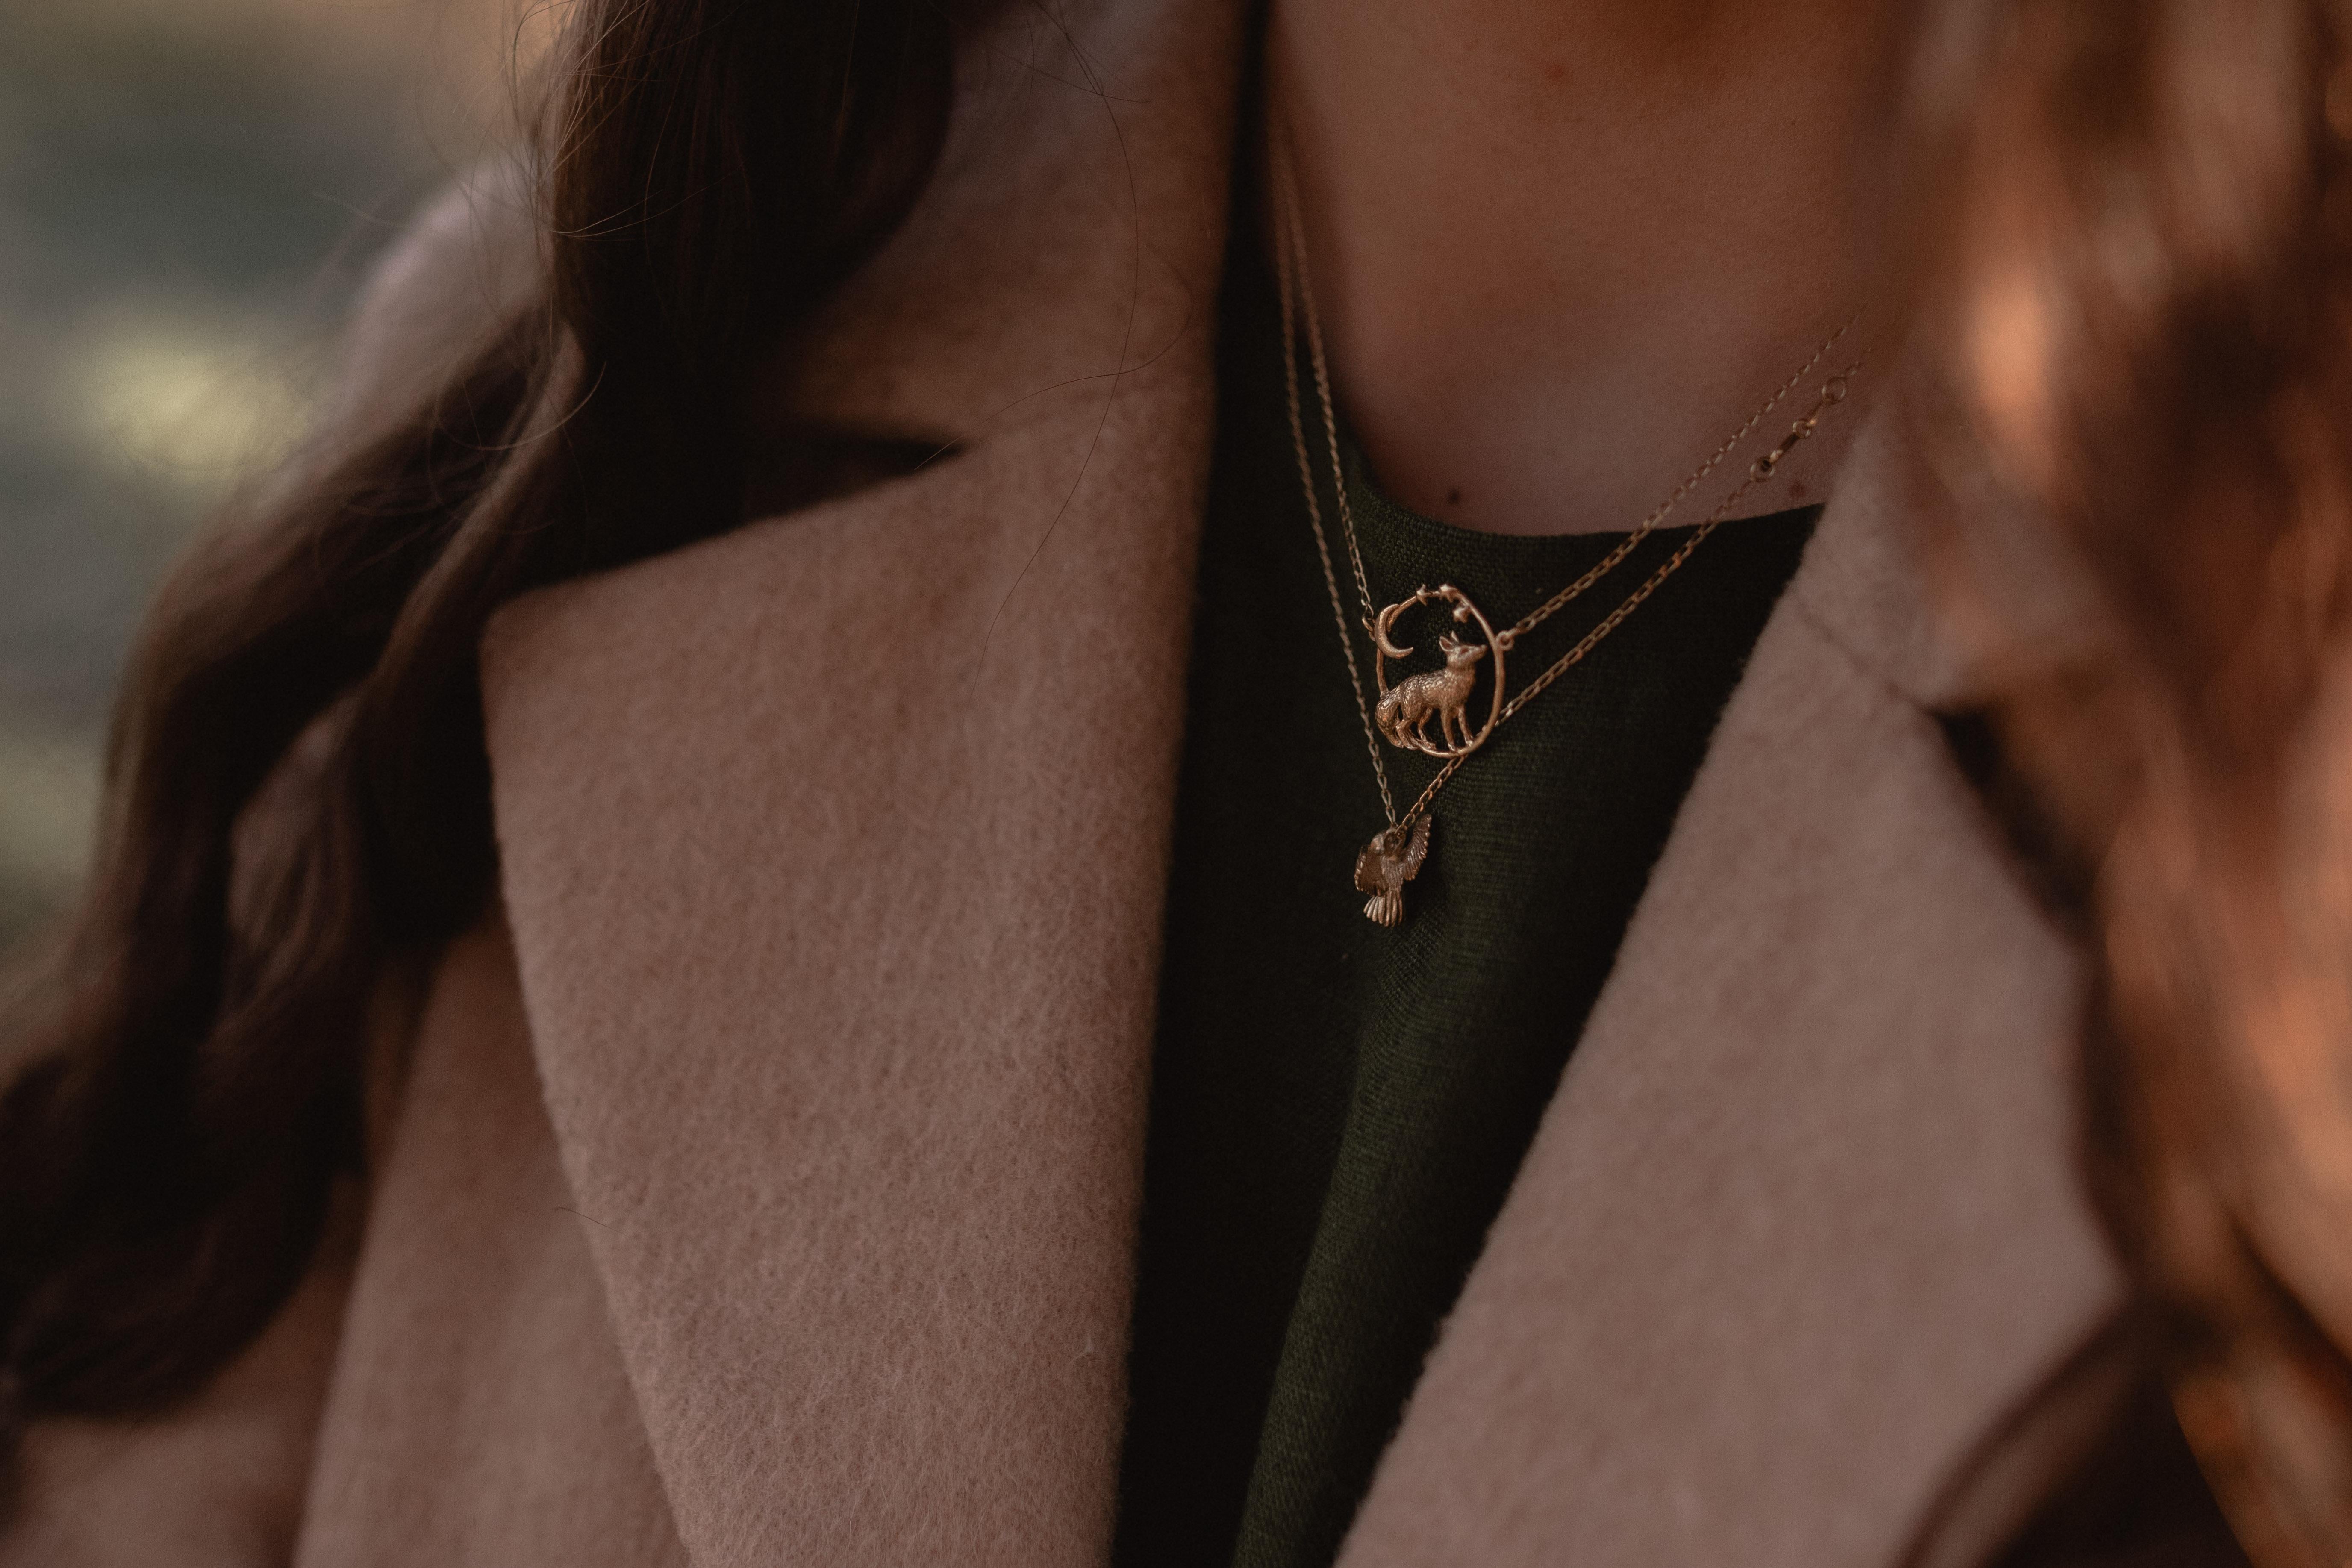 This dreamy fox necklace is cast in solid 18 Carat gold and finished by hand, and is created from Lucy's original hand-sculpted design. 

This stargazing fox pendant is made in London, United Kingdom using recycled or fairtrade Gold. Metals are